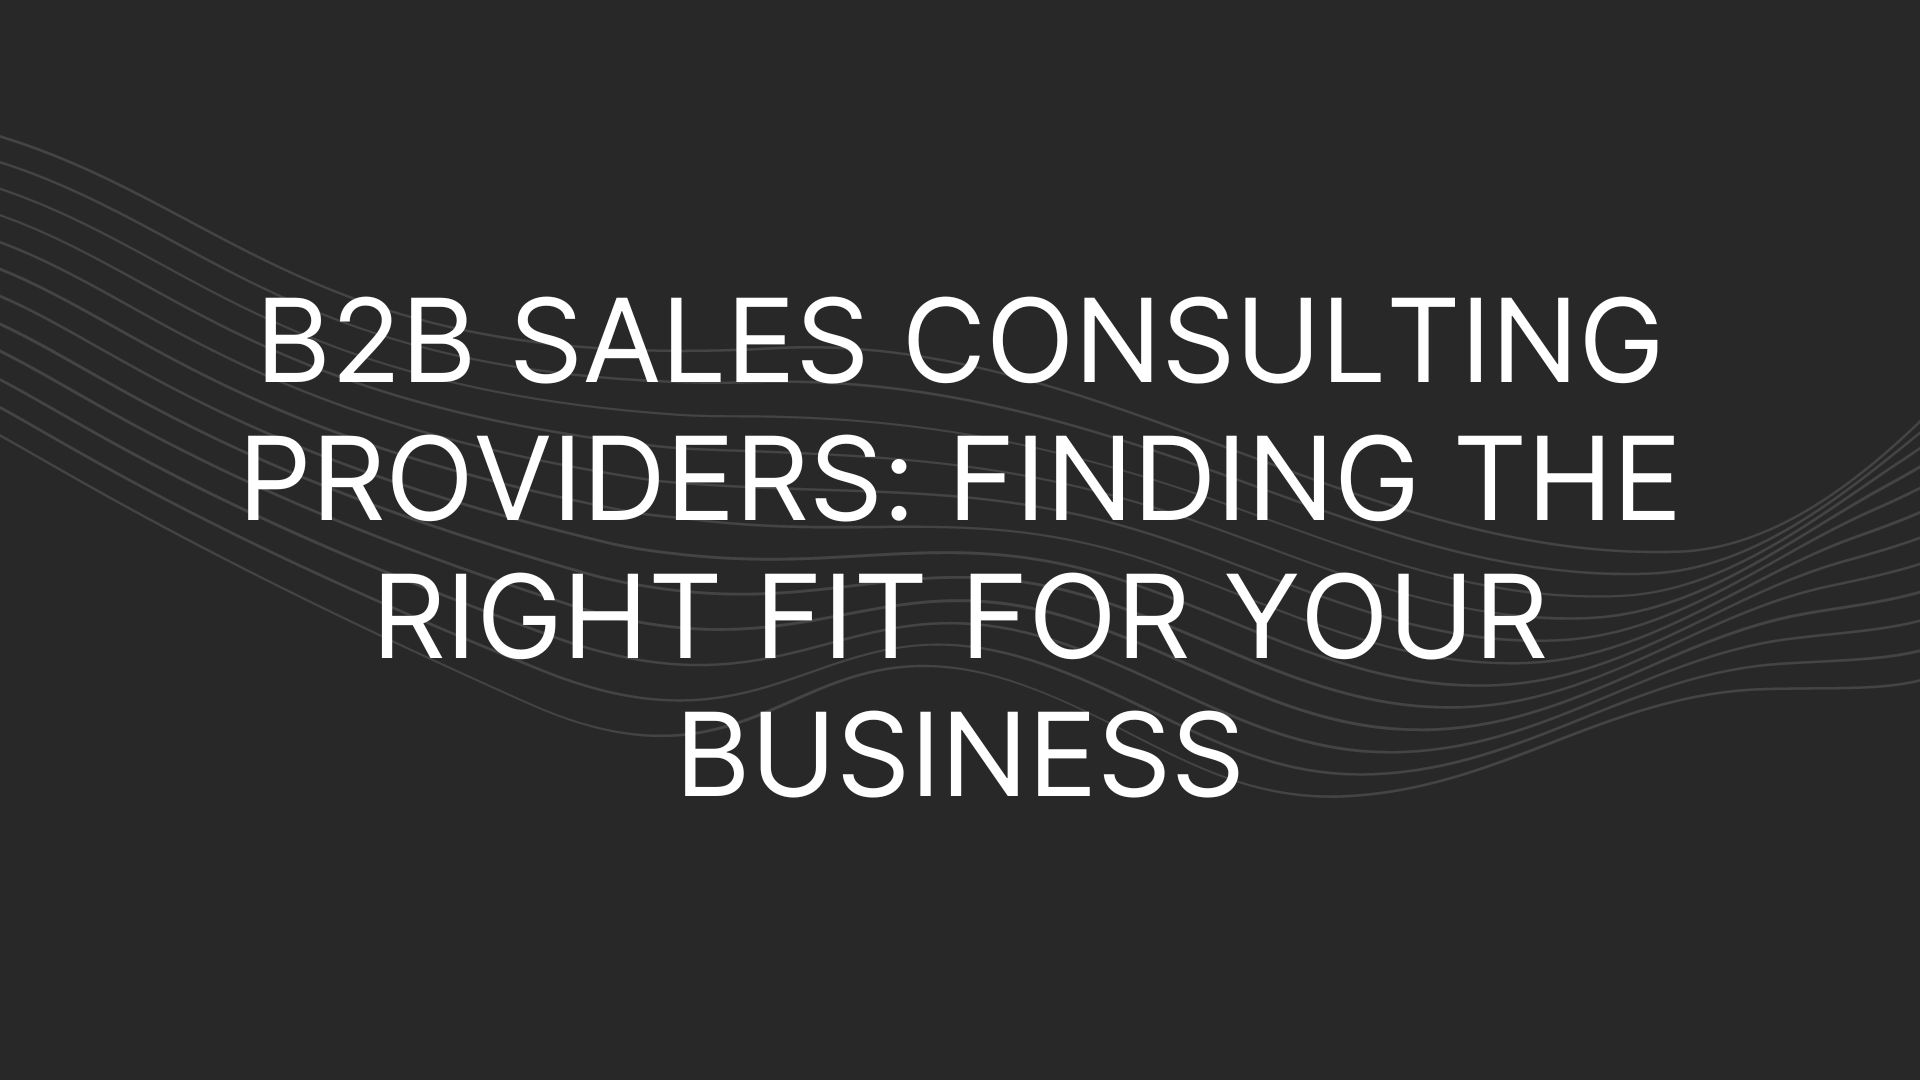 B2B Sales Consulting Providers